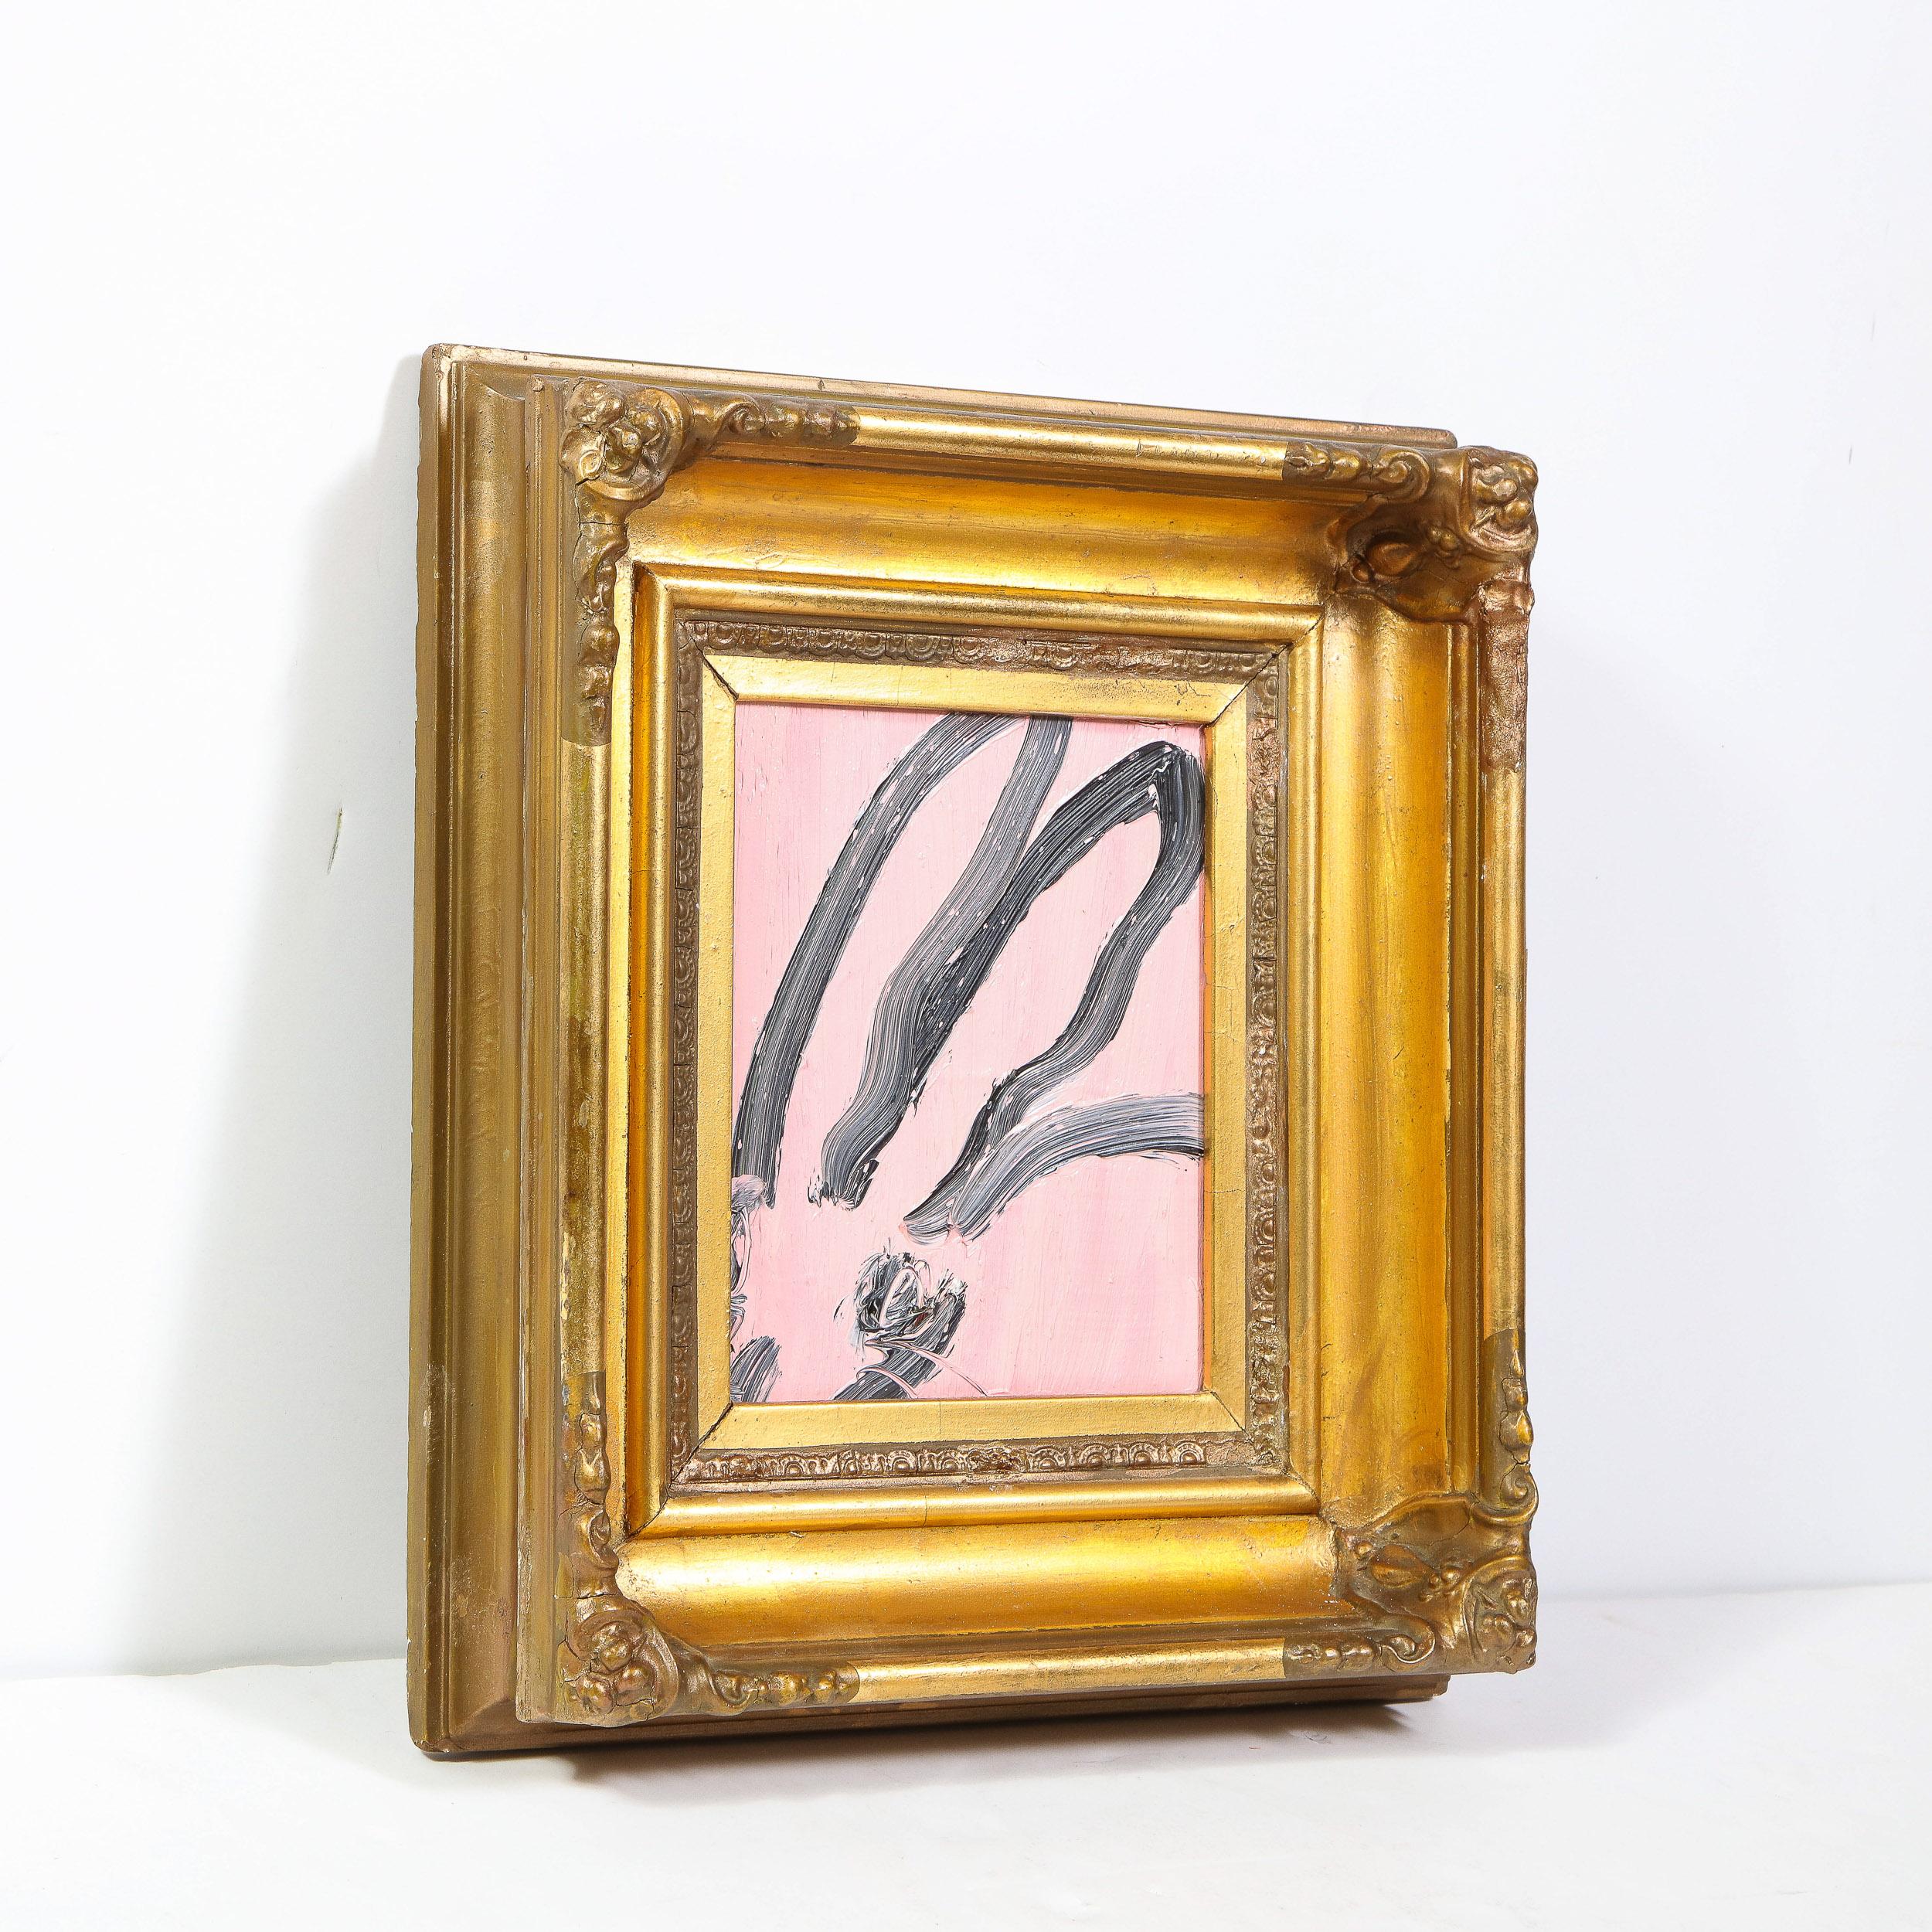 This whimsical and sophisticated painting was realized by the esteemed contemporary painter, Hunt Slonem in 2015. It presents a stylized bunny rabbit, rendered with loose and expressive brush strokes in black paint against a bubble gum pink